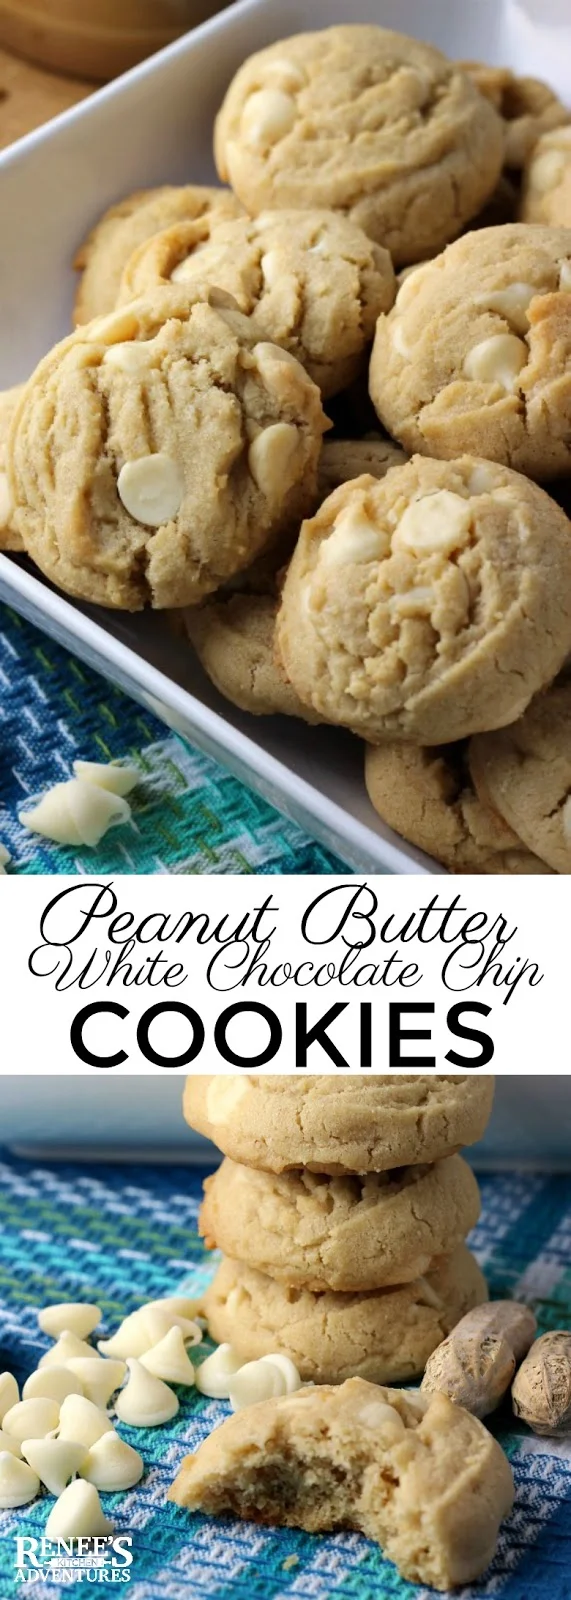 Peanut Butter White Chocolate Chip Cookies | Renee's Kitchen Adventures - Easy recipe for Peanut Butter White Chocolate Chip Cookies. Perfect a perfect addition to your holiday baking menu! Rich peanut butter cookies are studded with lots of white chocolate chips and sprinkled with a little salt. These cookies are delicious! #cookie #cookies #cookierecipe #peanutbuttercookies #chocolatechips #whitechocolatechips